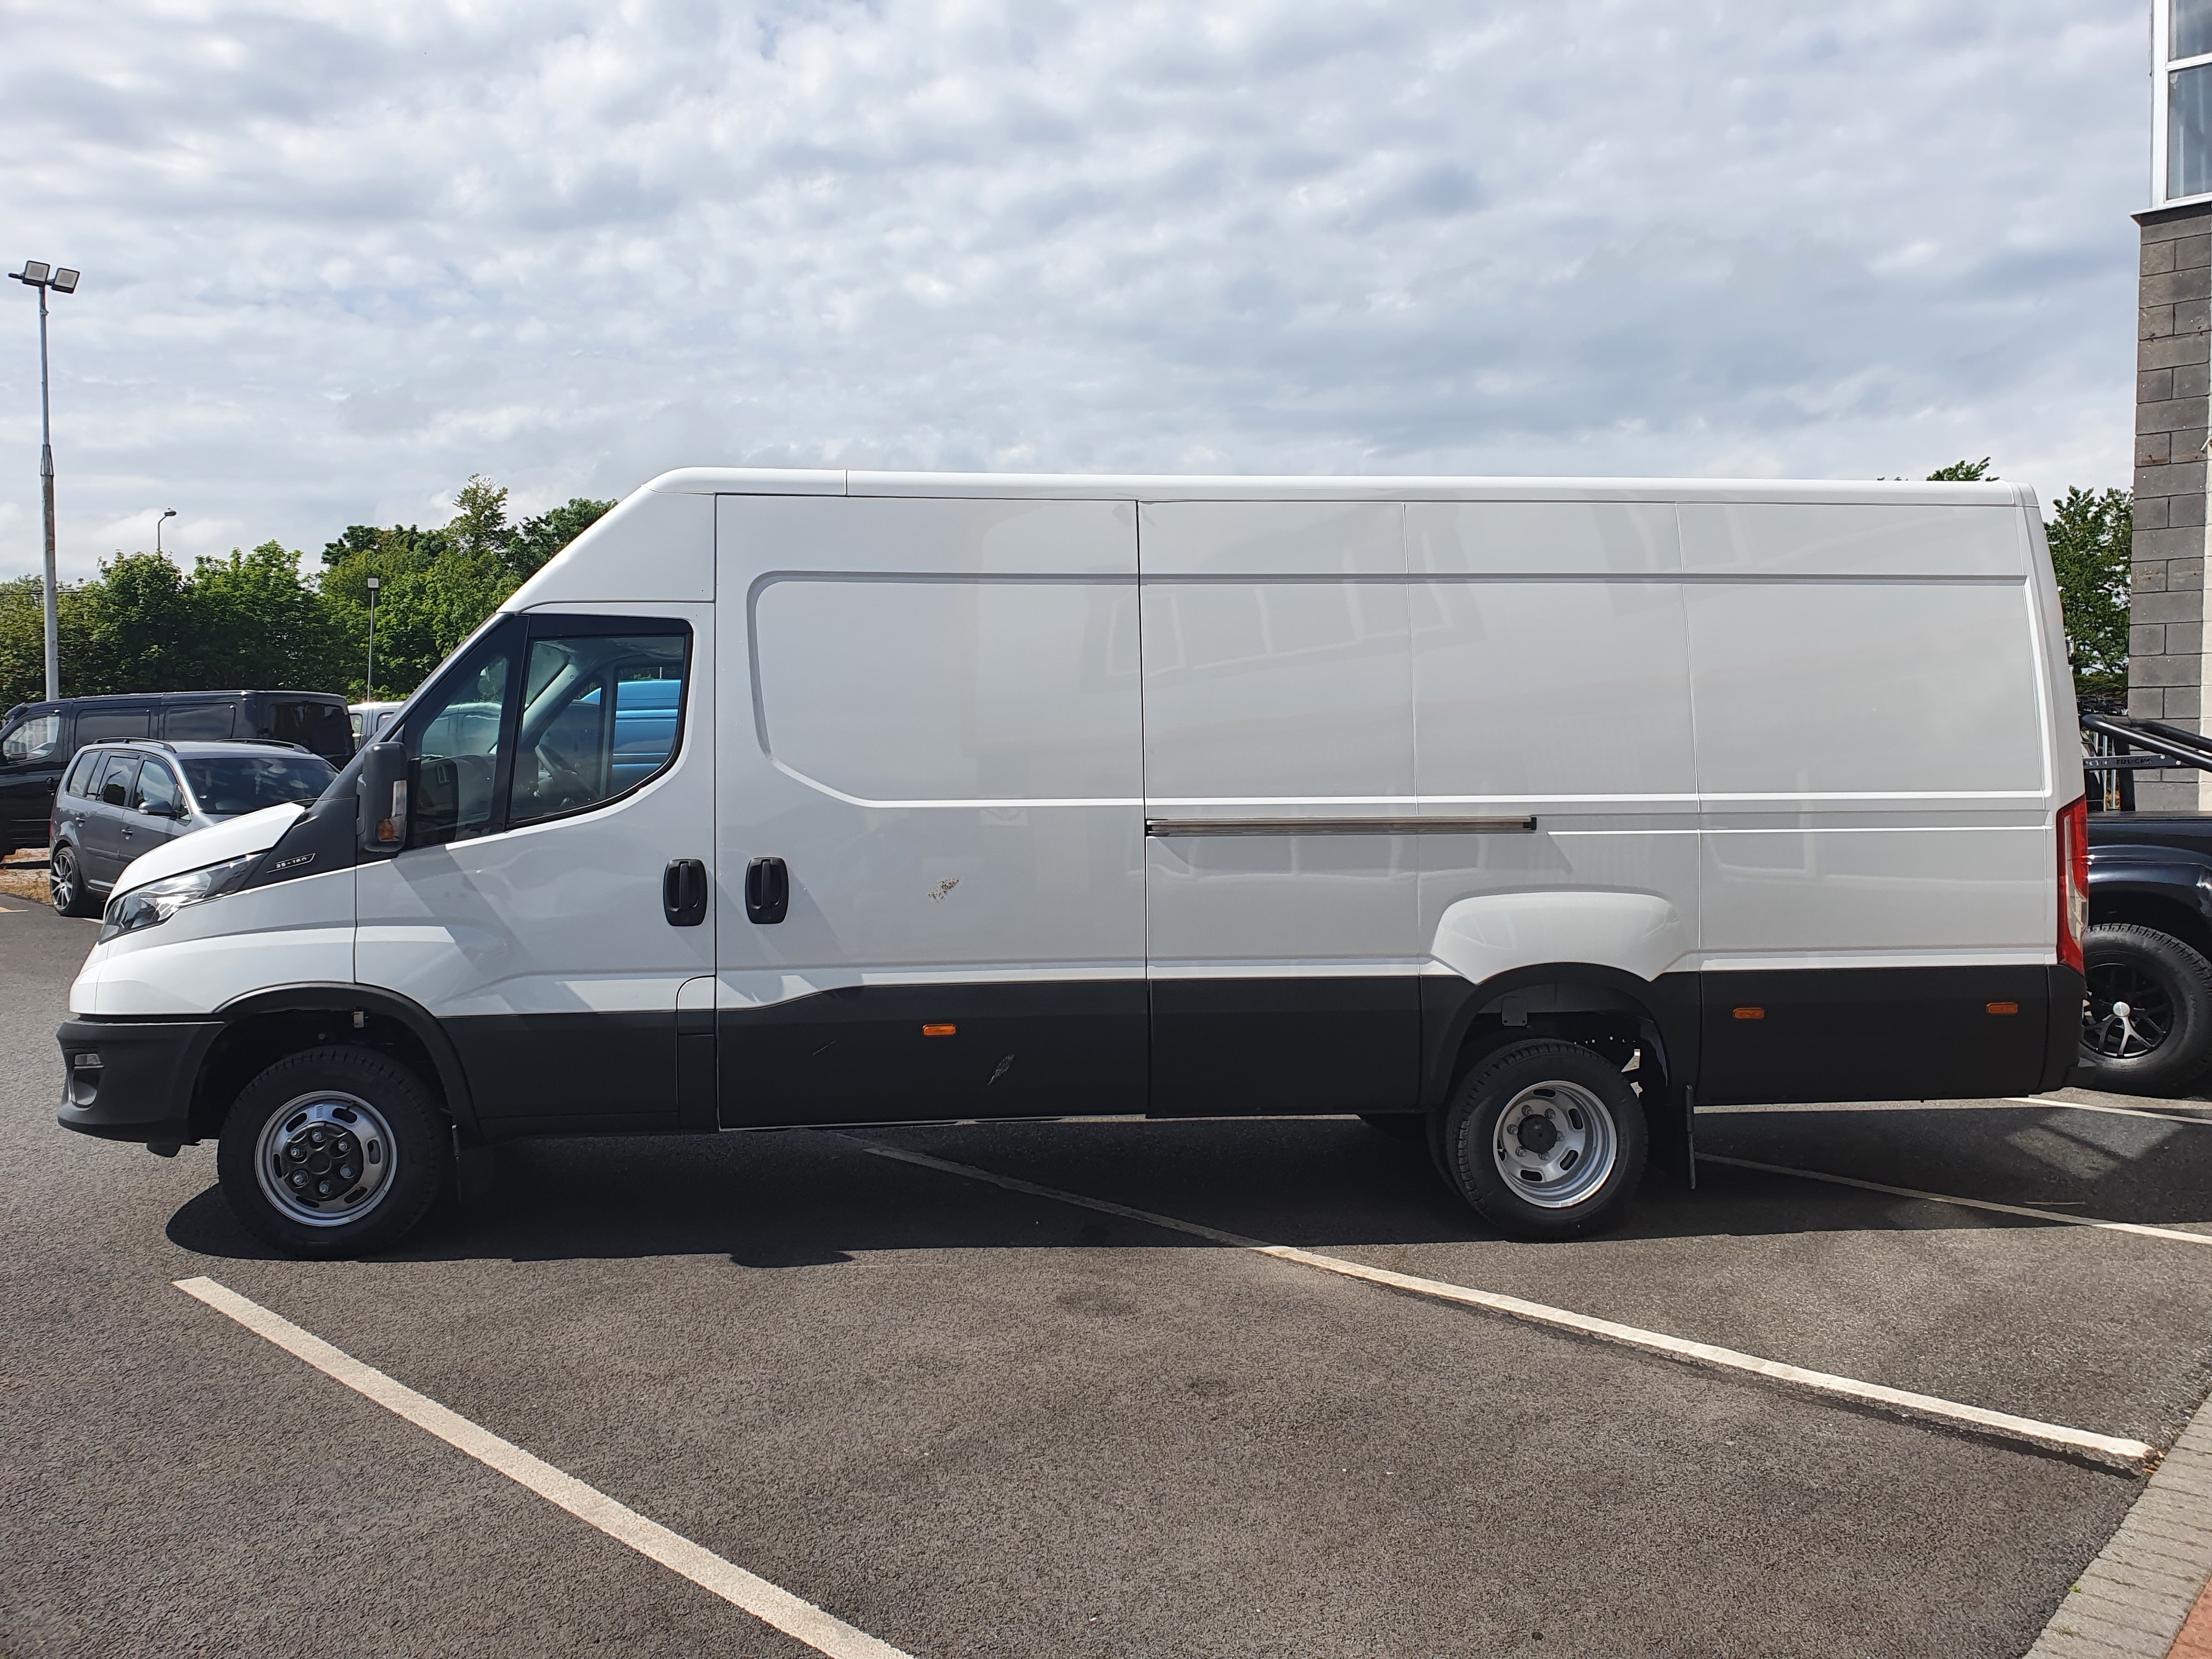 iveco daily lwb for sale